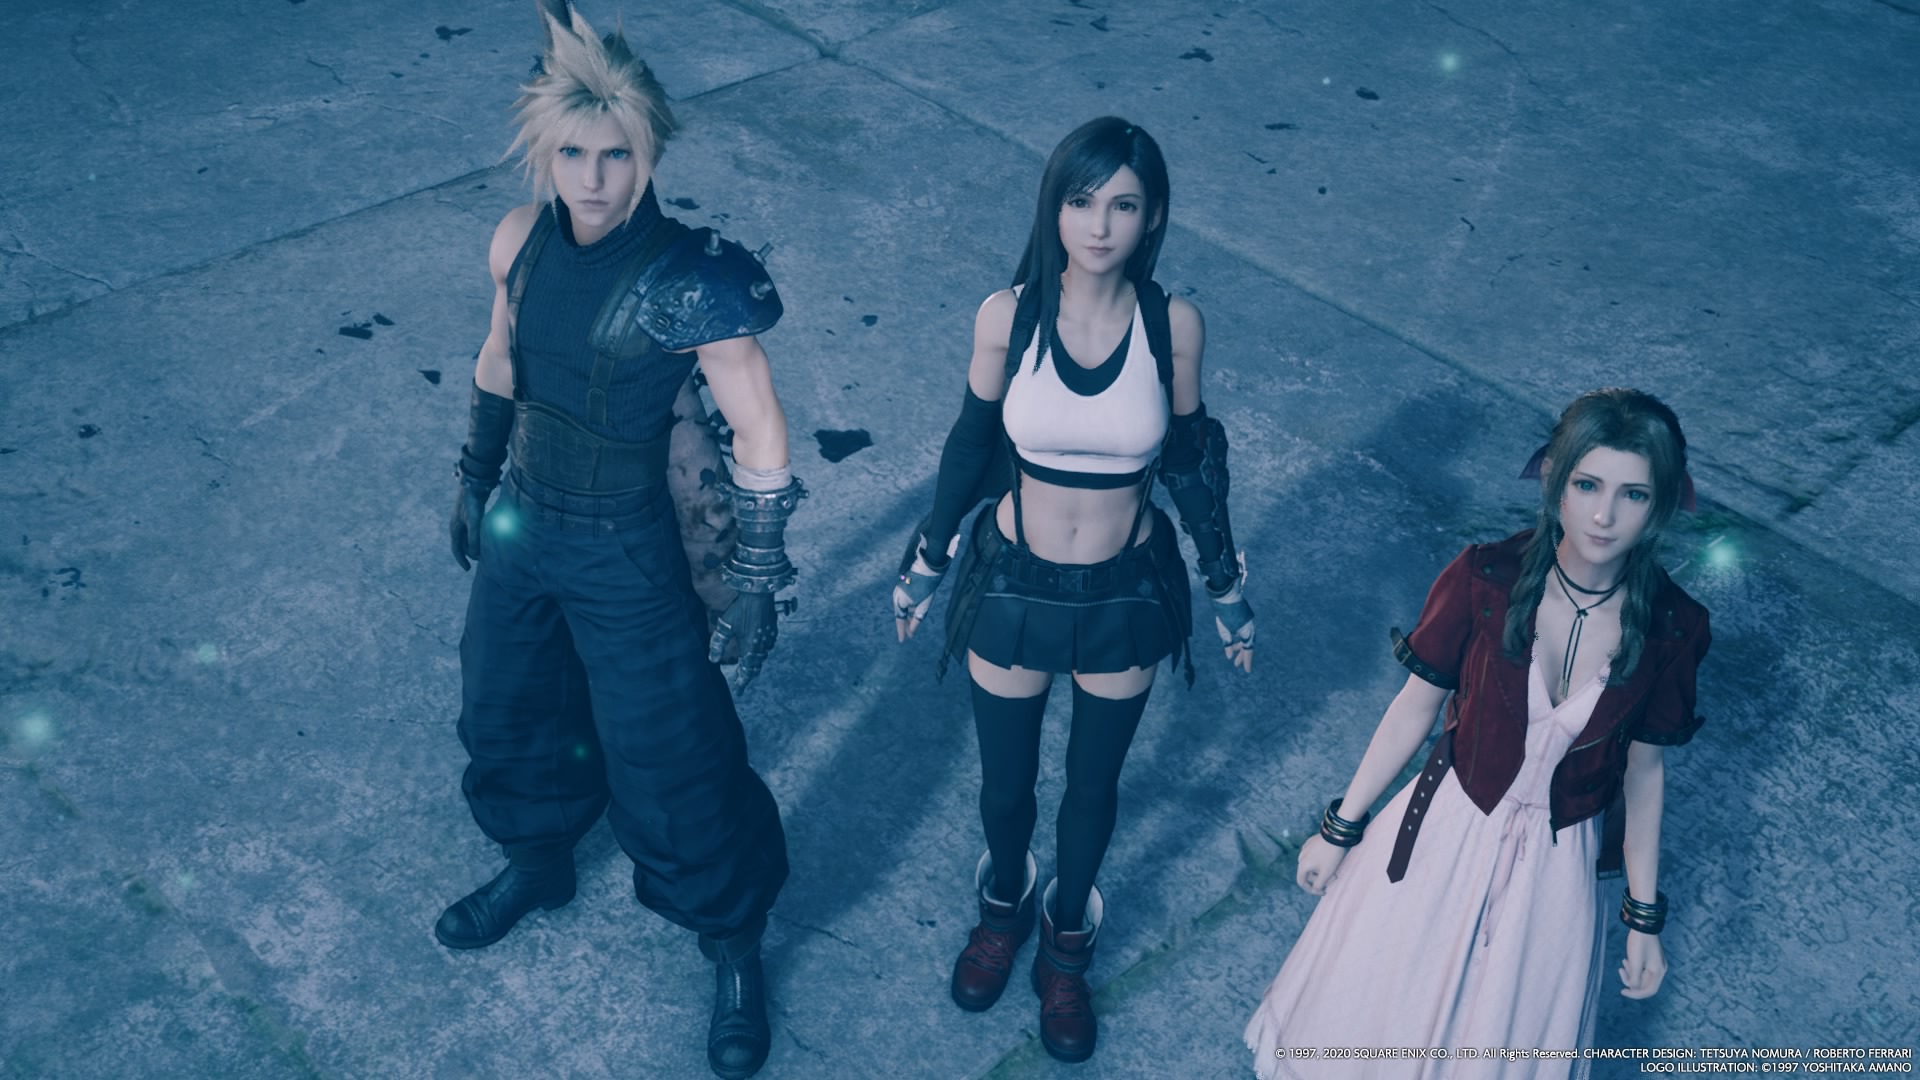 ff7 remake playstation now